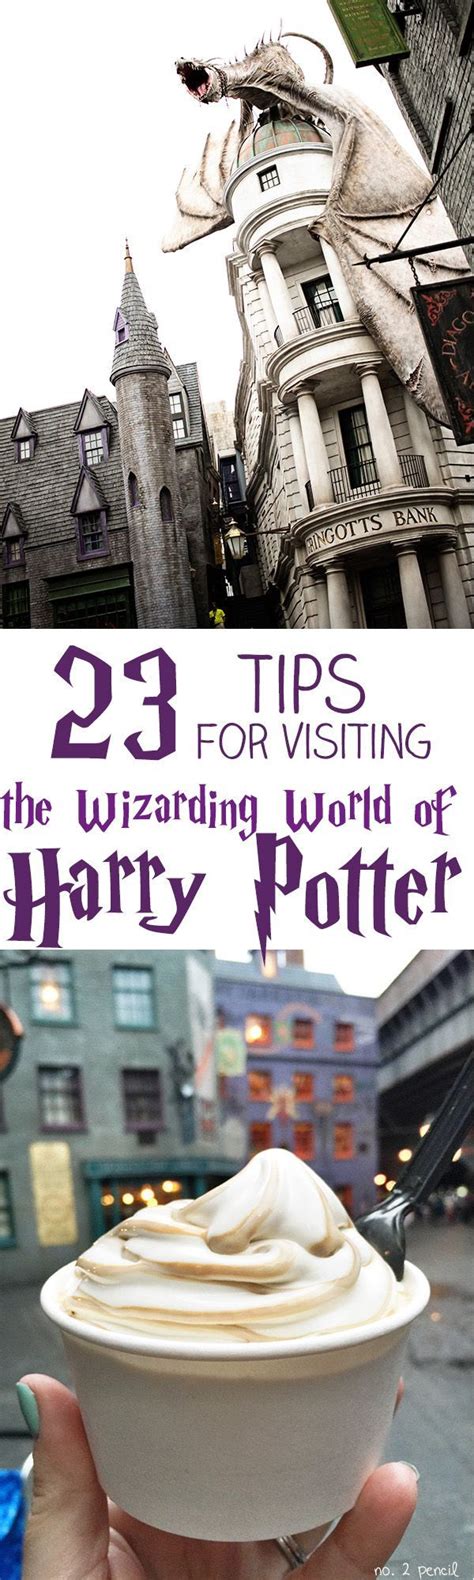 23 Tips For Visiting The Wizarding World Of Harry Potter Must